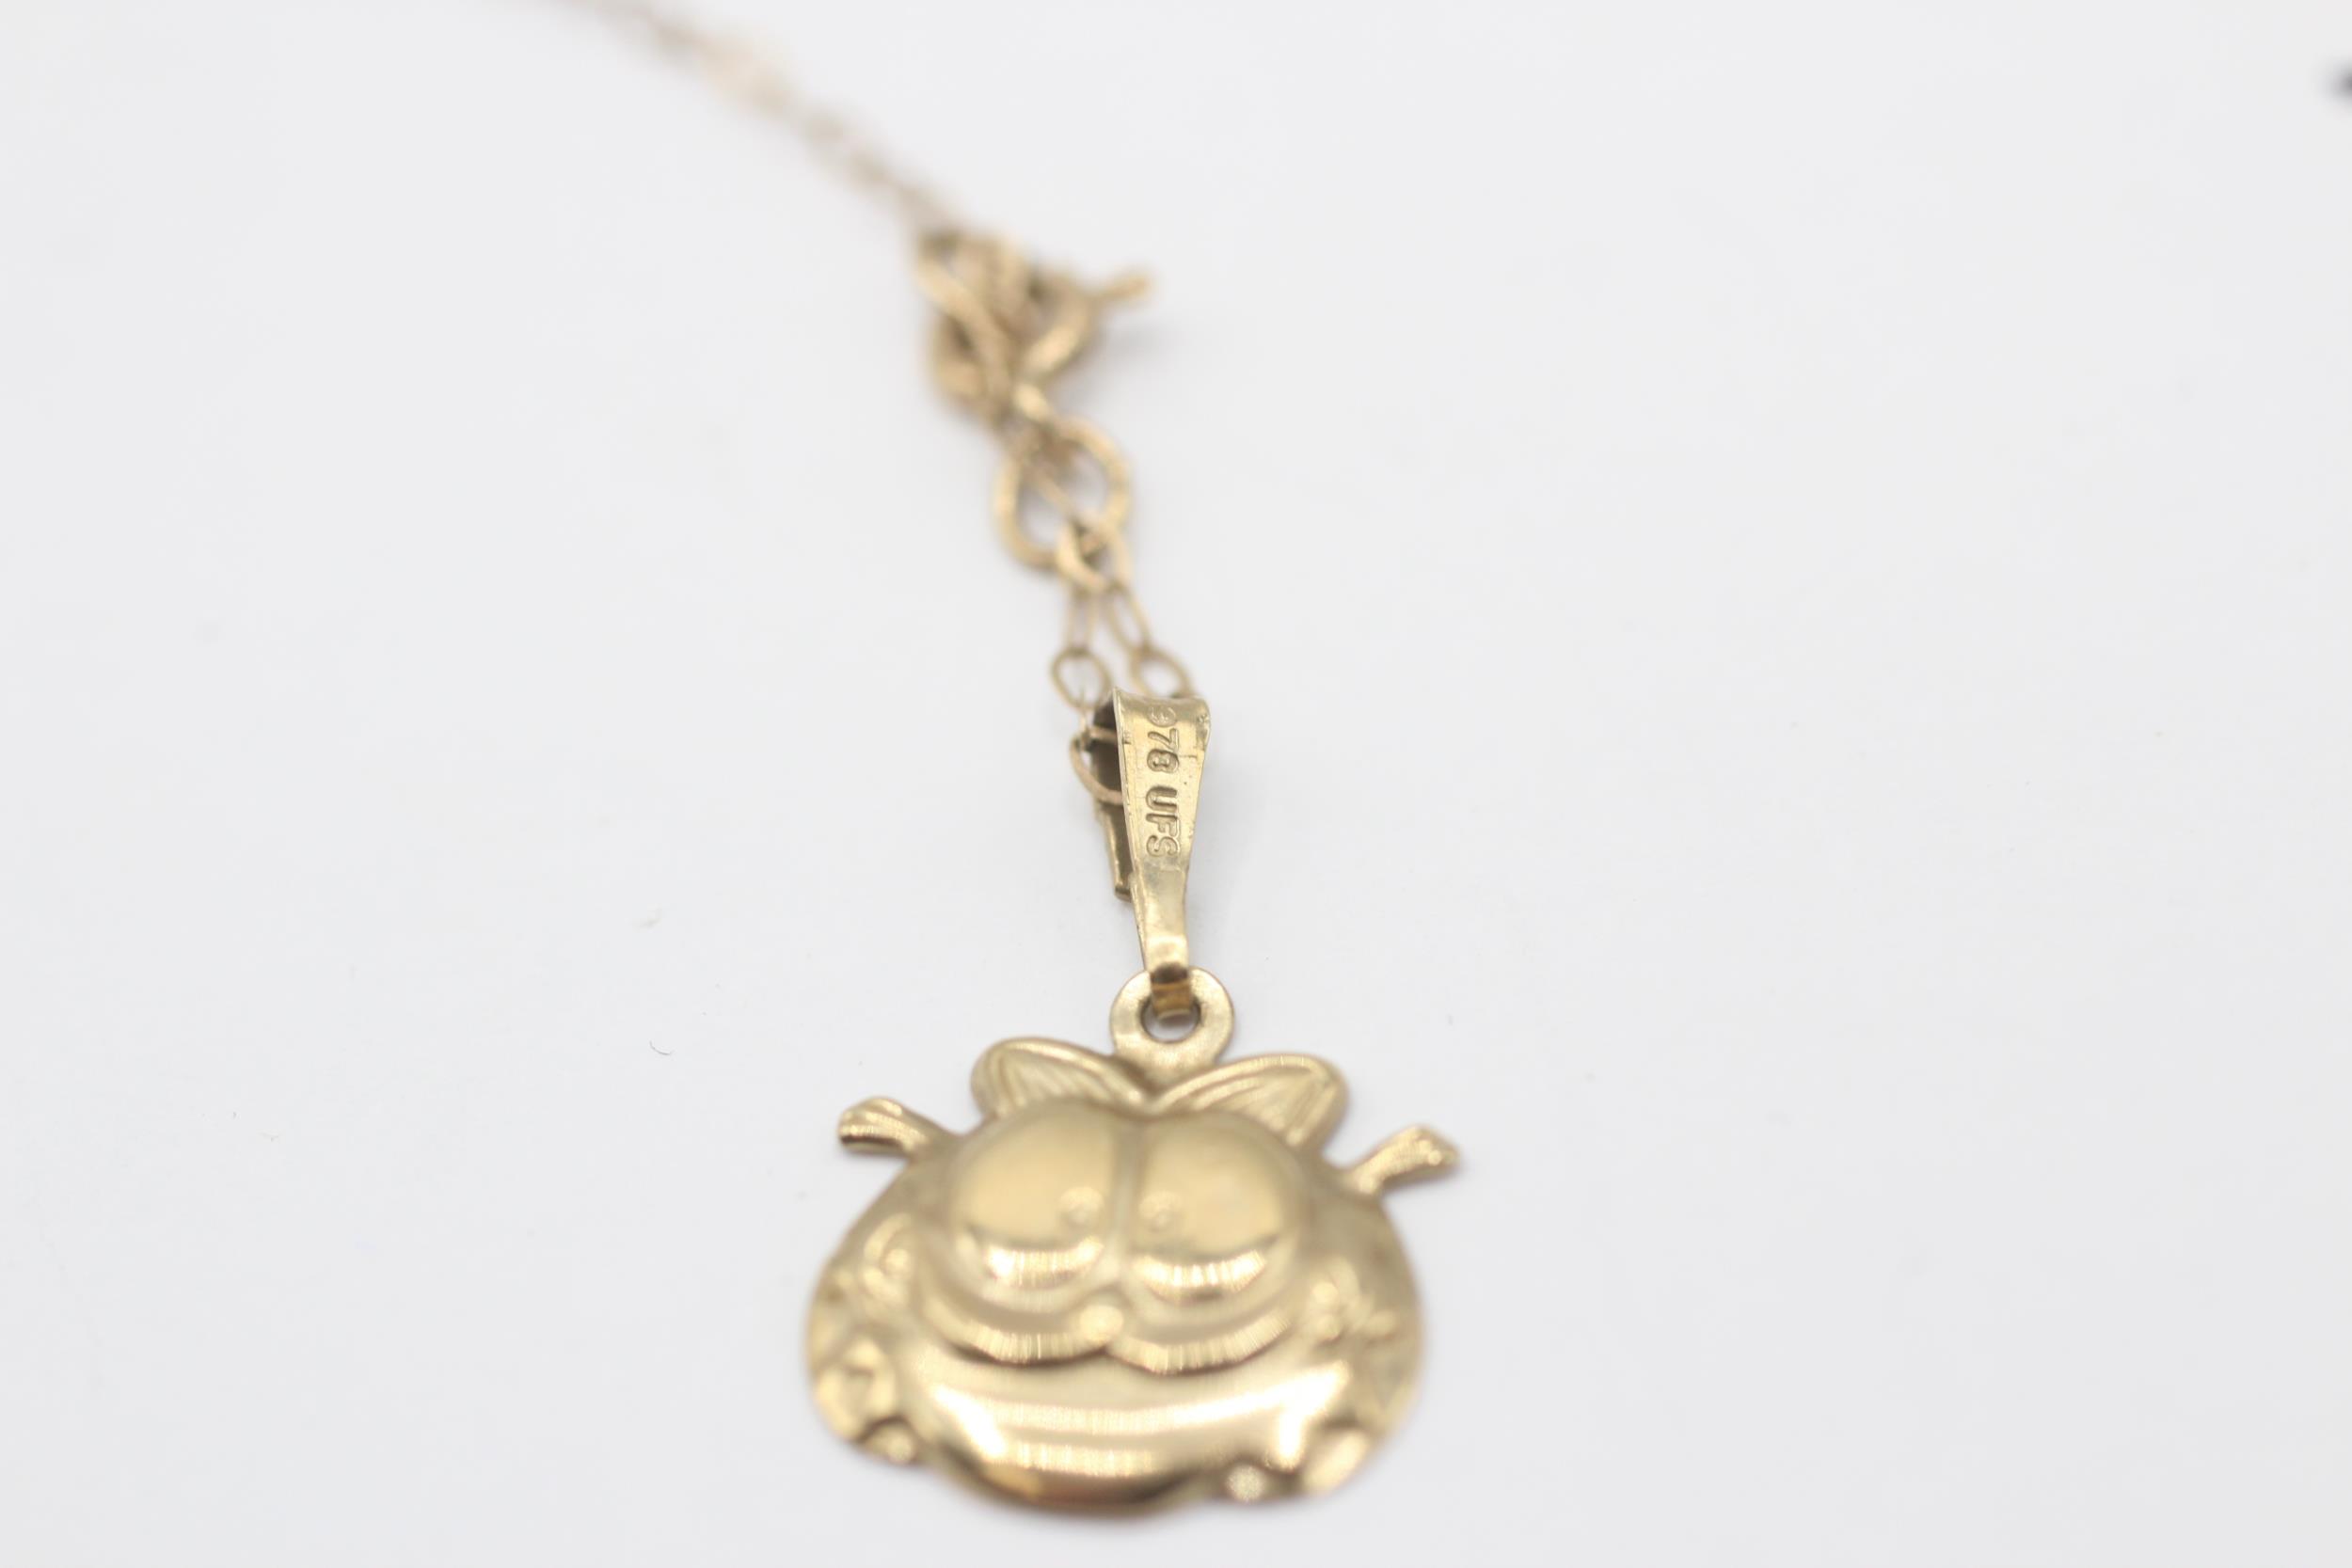 9ct gold Garfield pendant necklace 0.6 g - Image 3 of 4